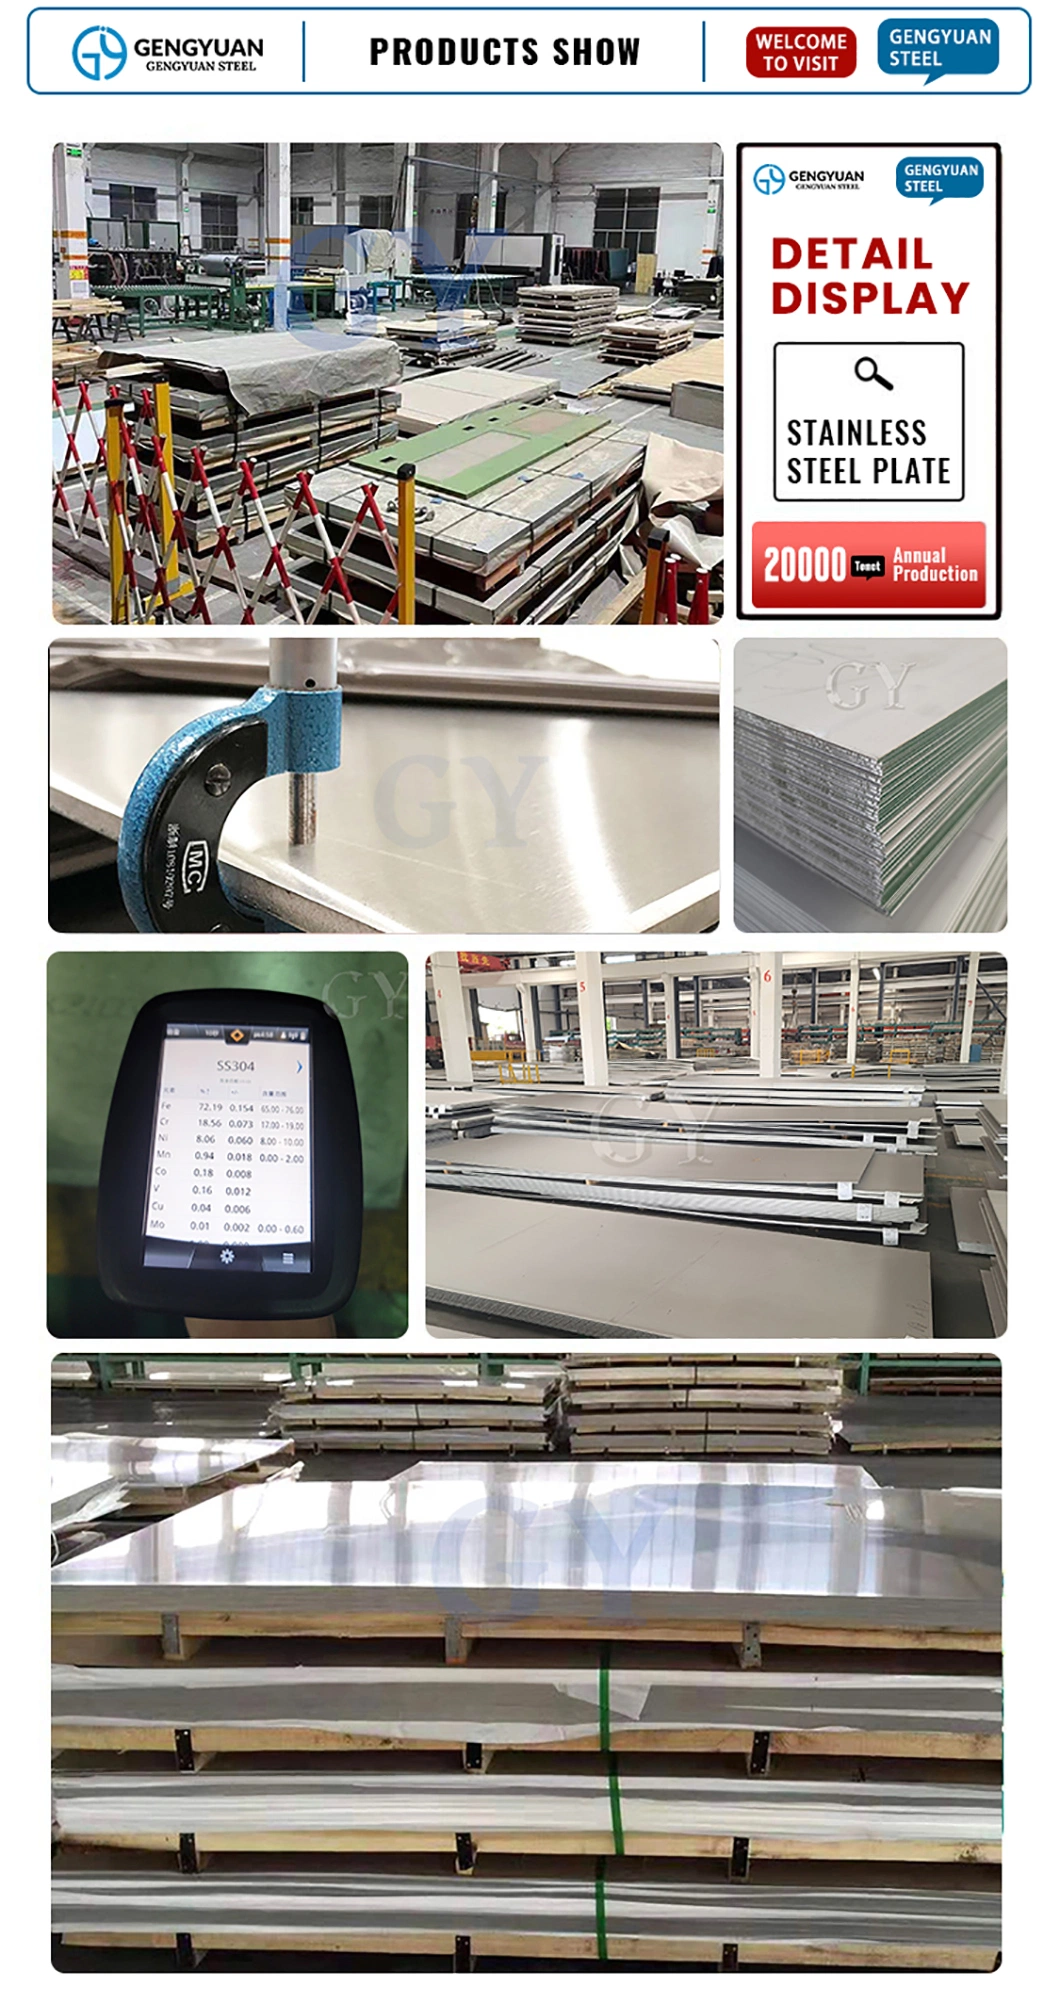 New Product Promotion 0.3mm 0.5mm Thickness Ss Sheet 2b Surface 304 SUS304 1.4301 X5crni18-9 Stainless Steel Sheet